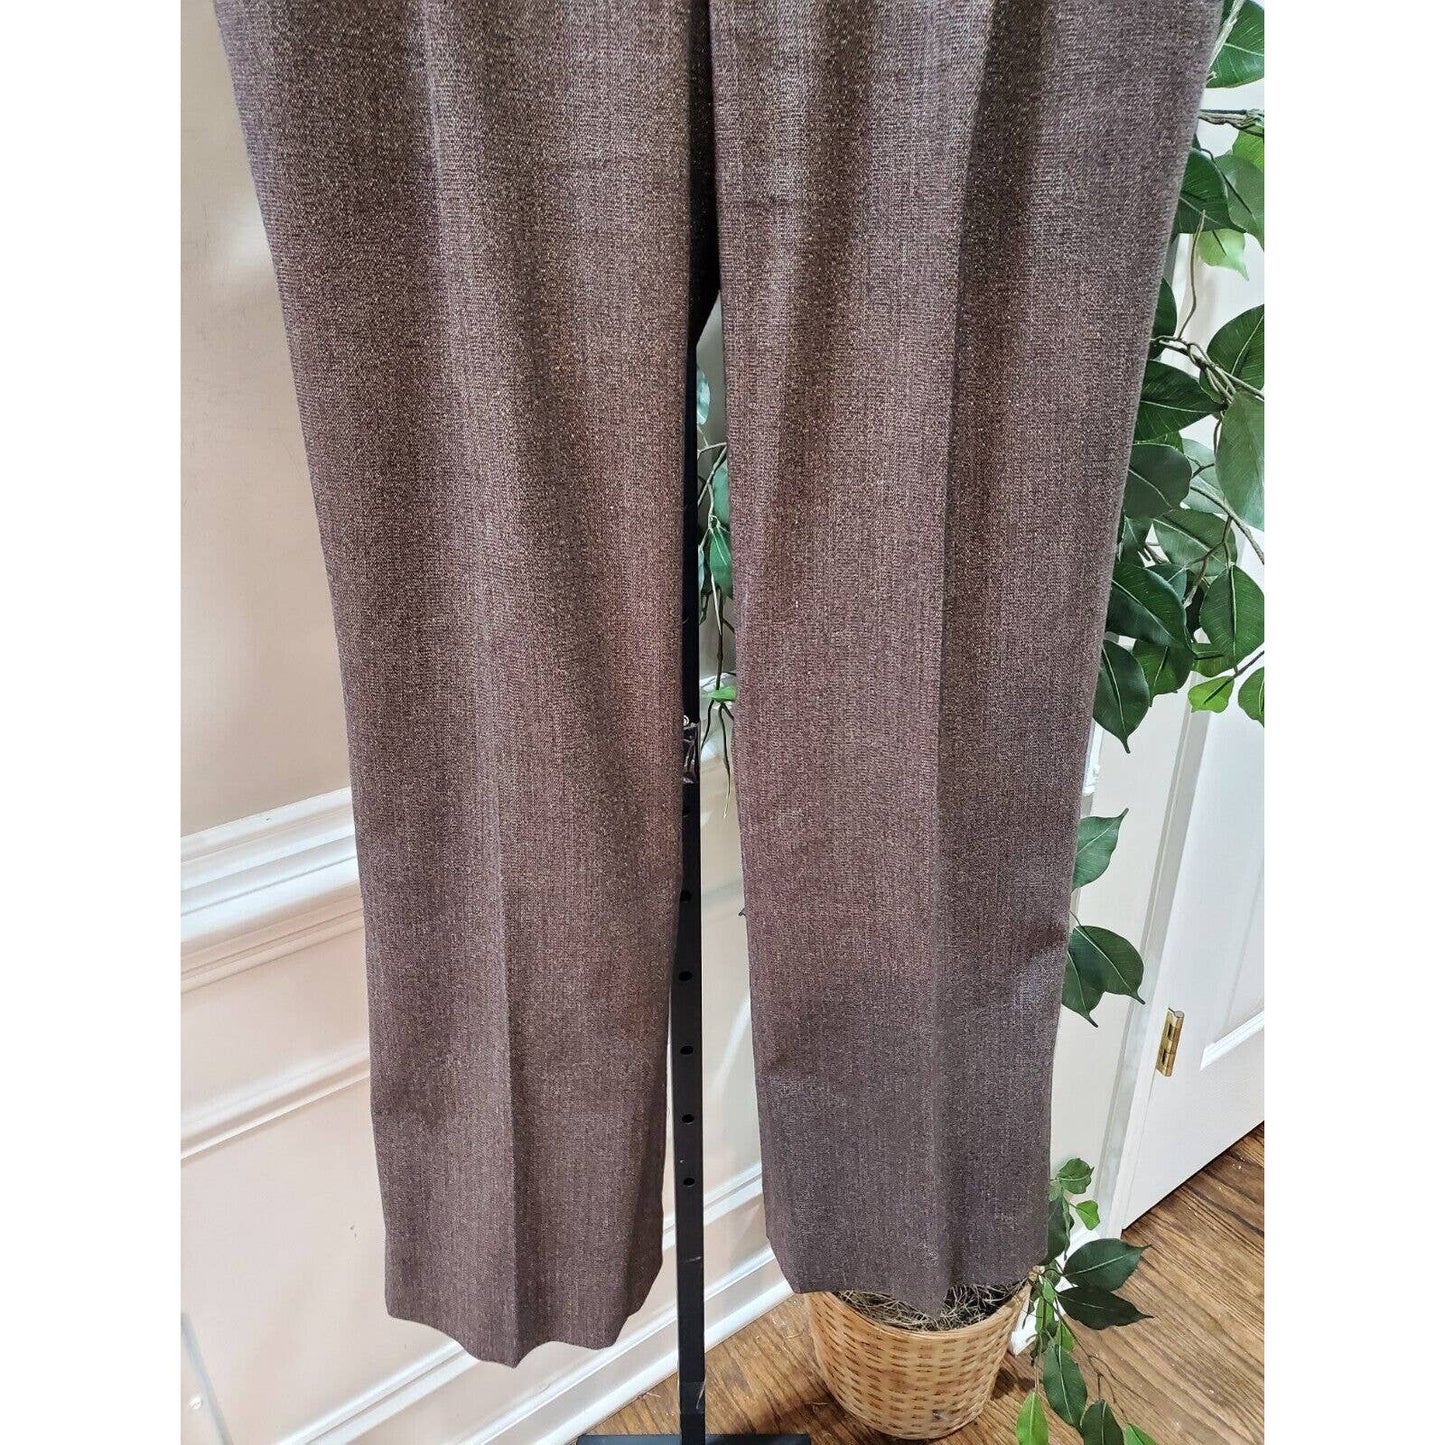 Nine West Women Brown Polyester High Rise Button Flat Front Dress Pant Size 8